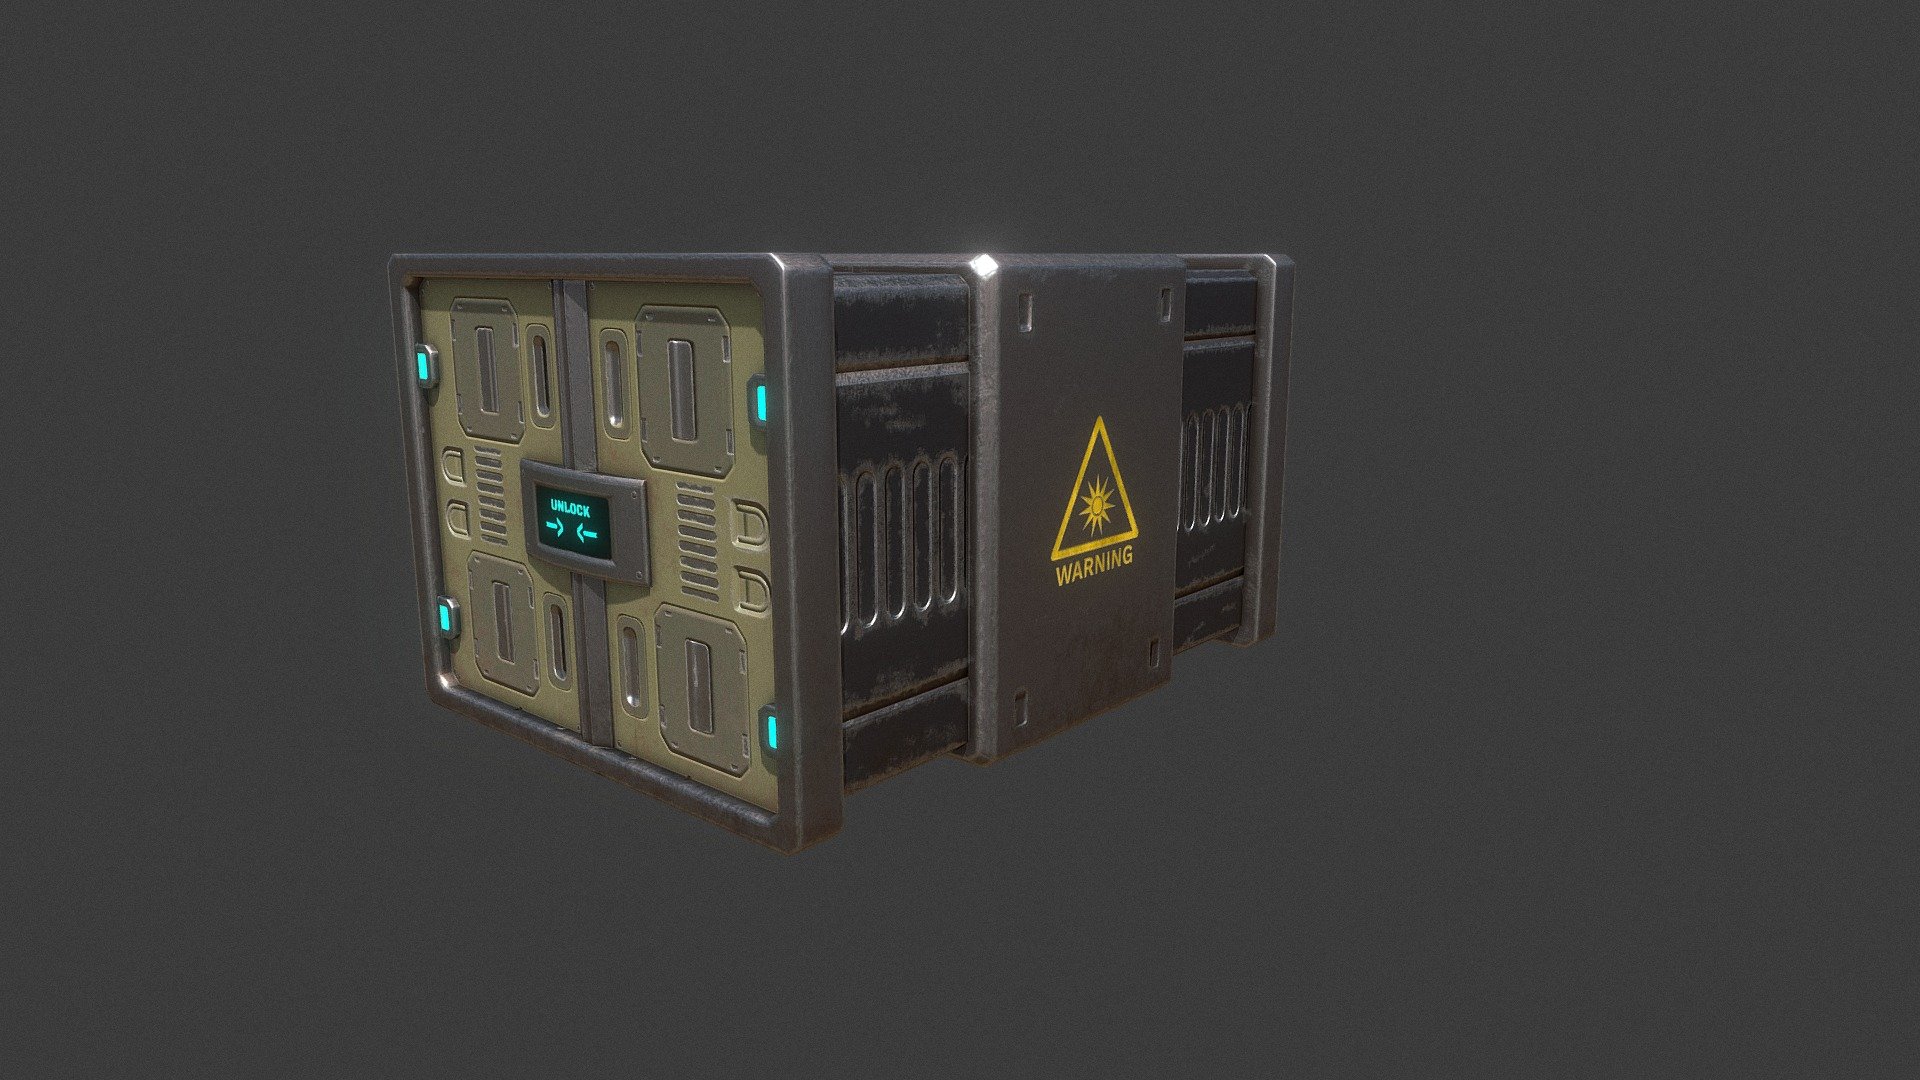 A prop practice for a scifi theme.
Made with 3ds max, Substance Painter 3d model